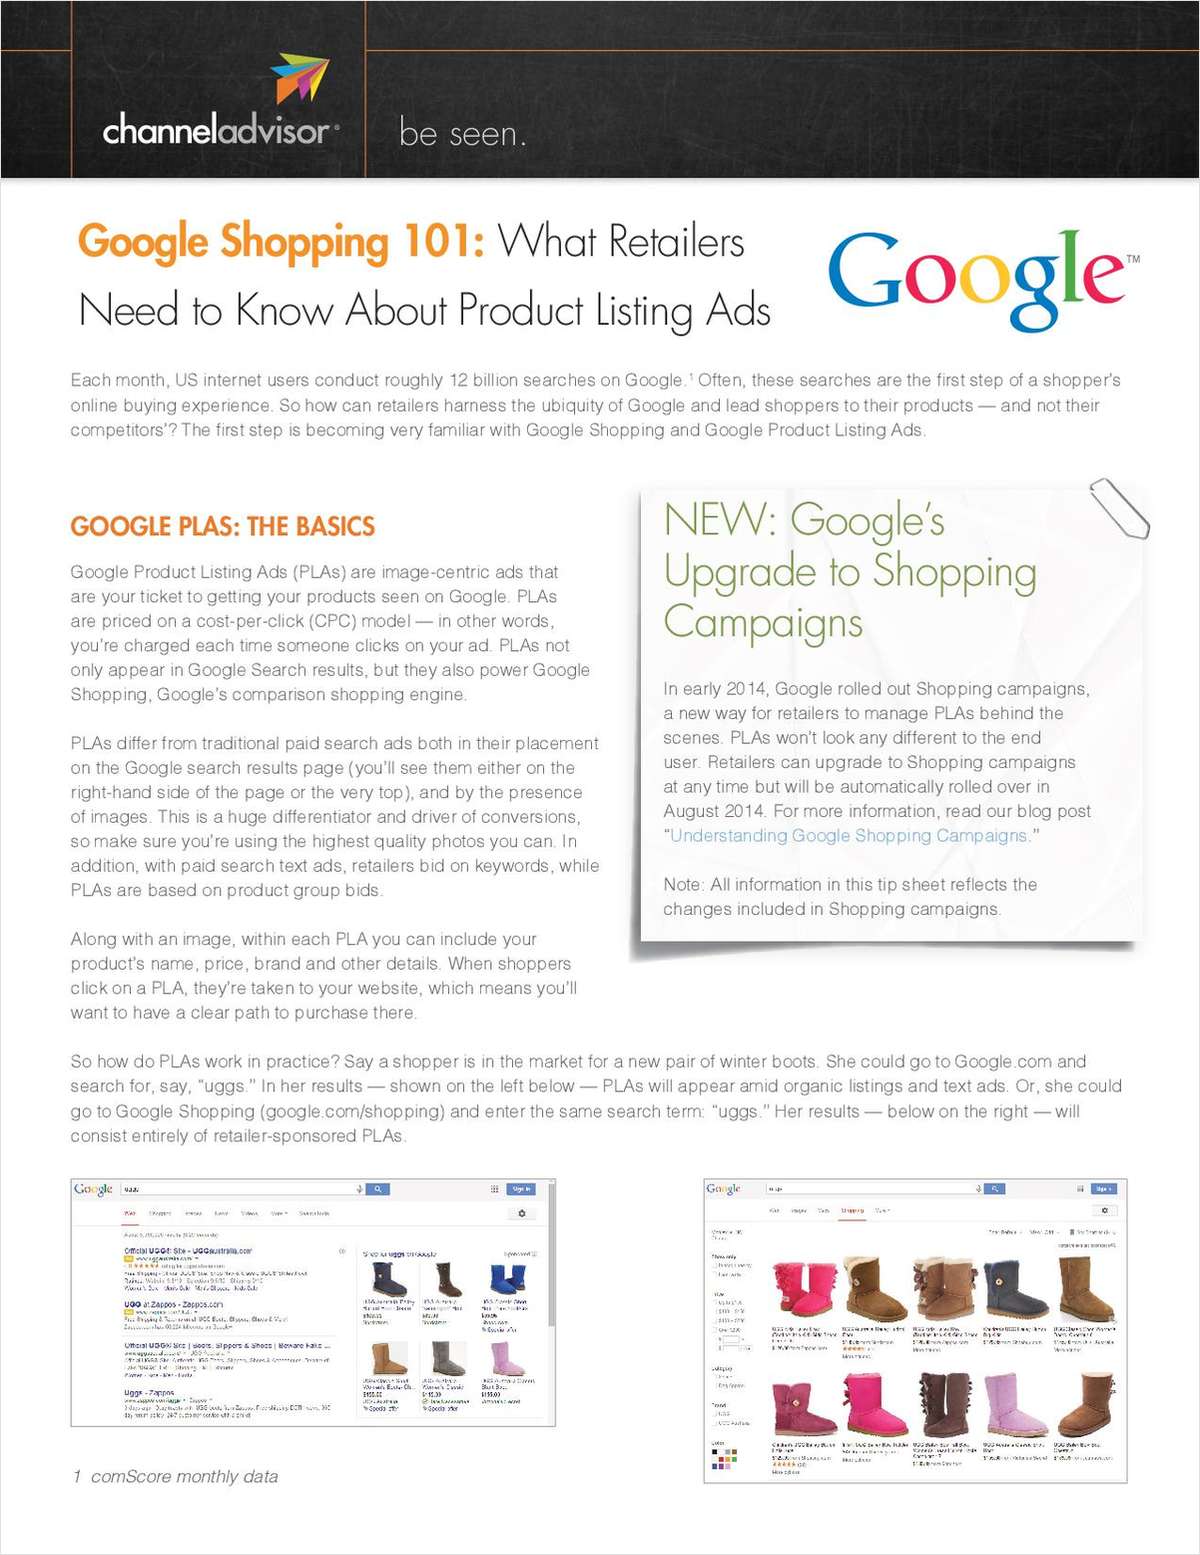 Google Shopping 101: What Retailers Need to Know About Product Listing Ads